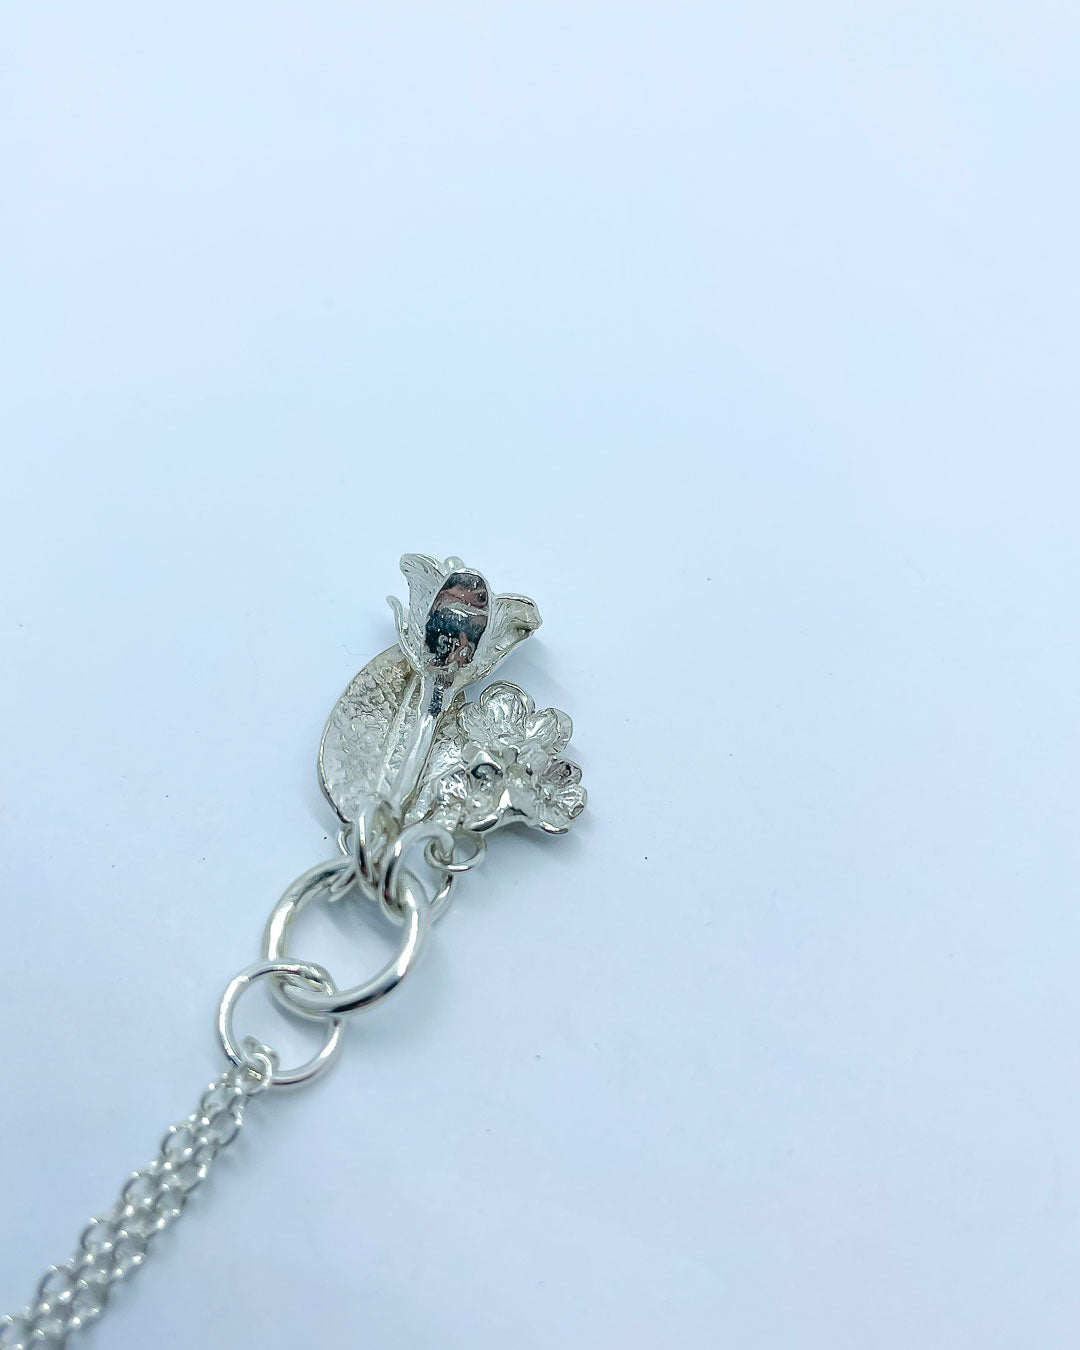 Three Sterling Silver Charms hung from a silver chain - the charms are a bouquet of flowers, a textured leaf and a freesia bloom